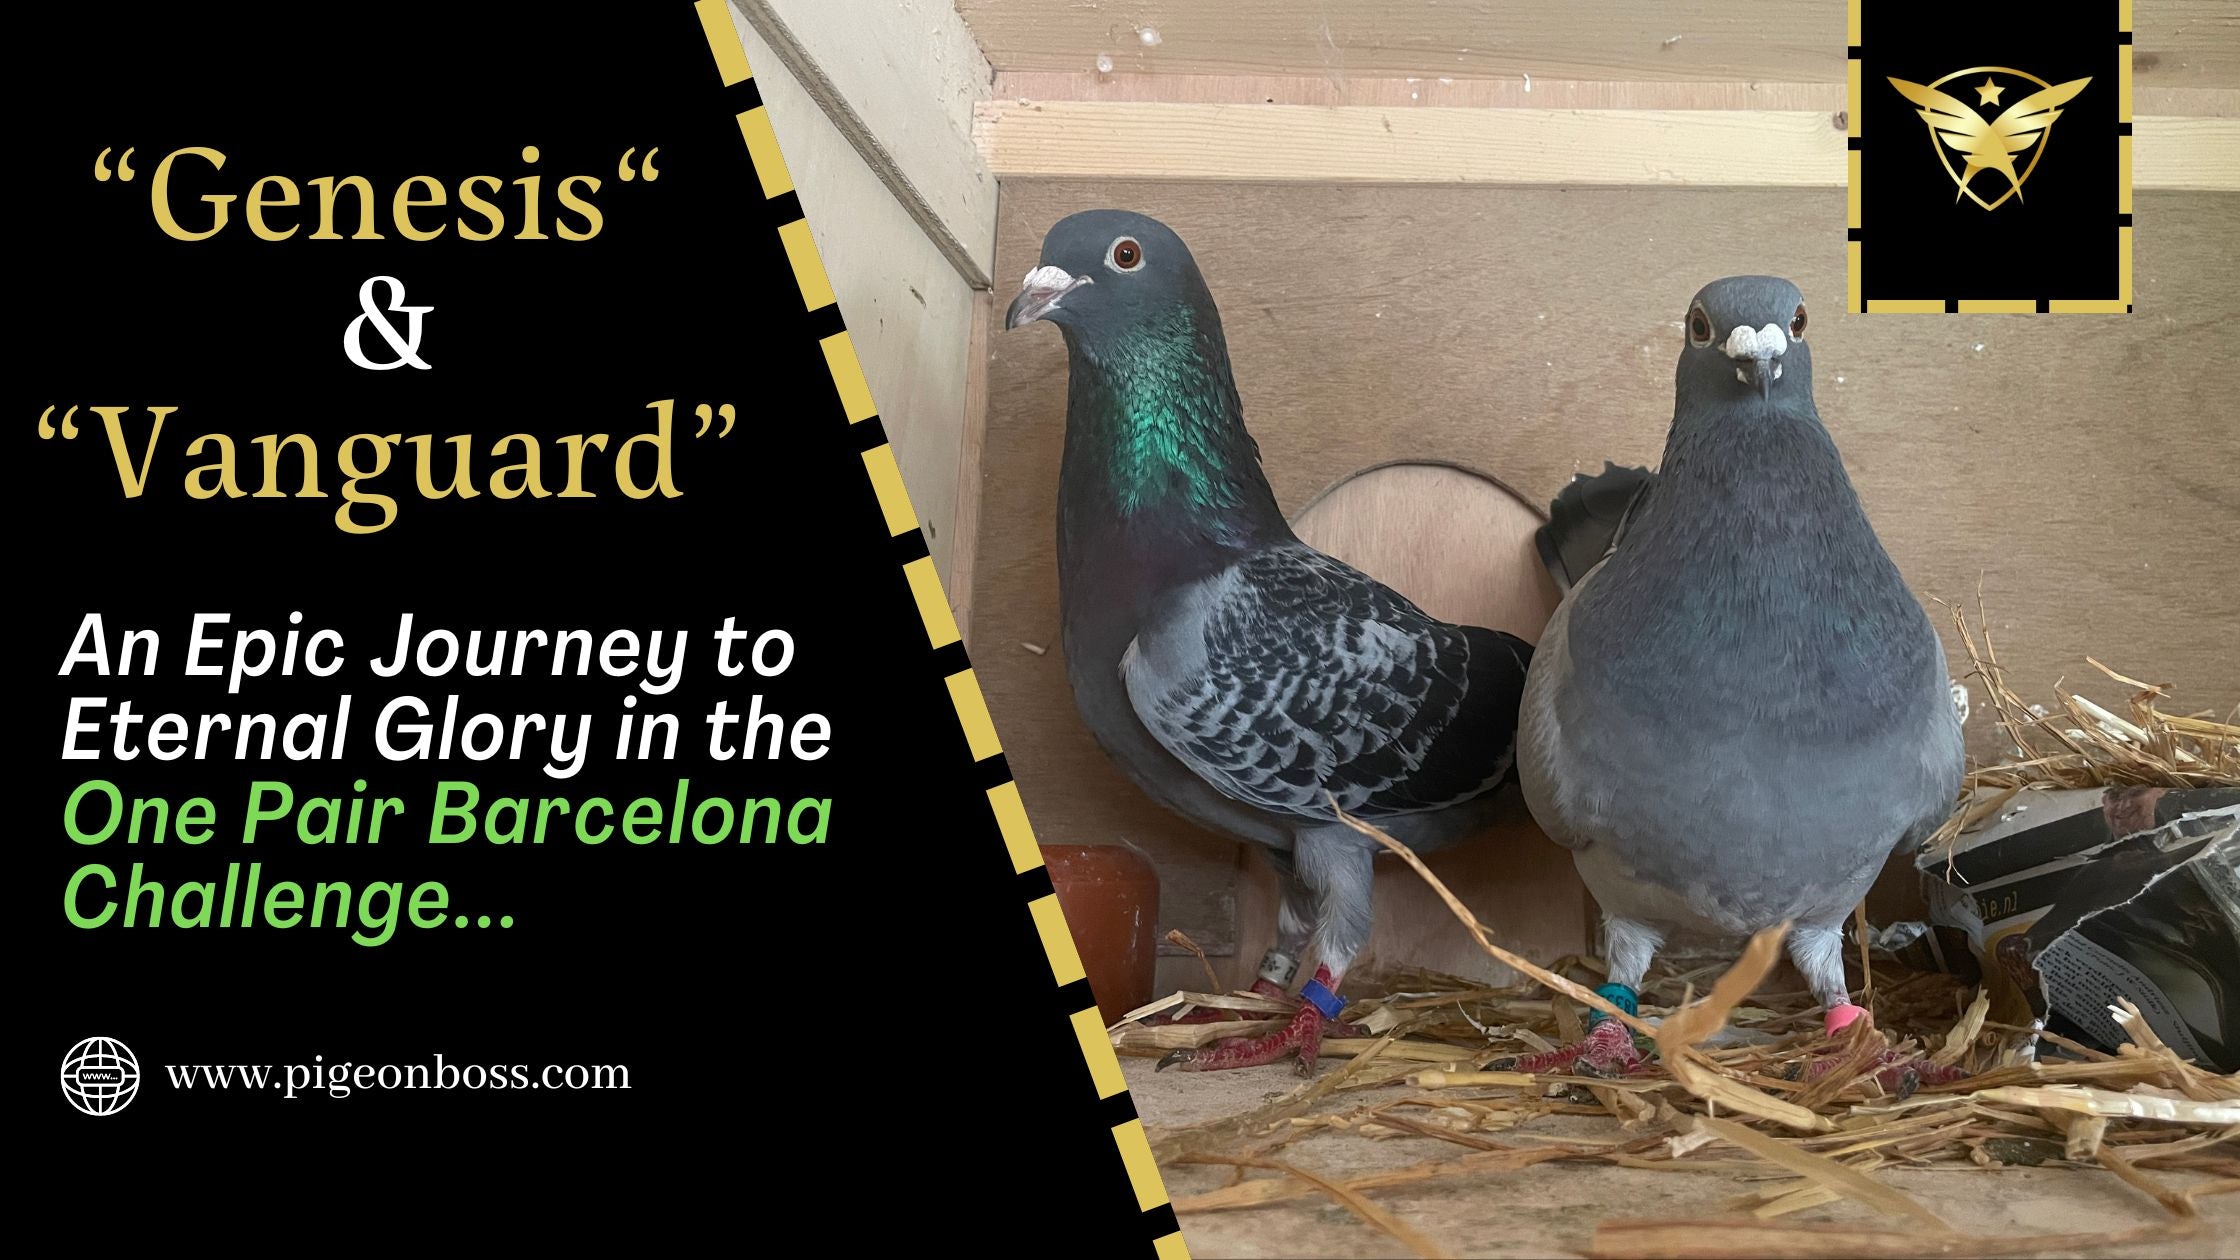 Genesis & Vanguard: An Epic Journey to Eternal Glory in the One Pair Barcelona Challenge